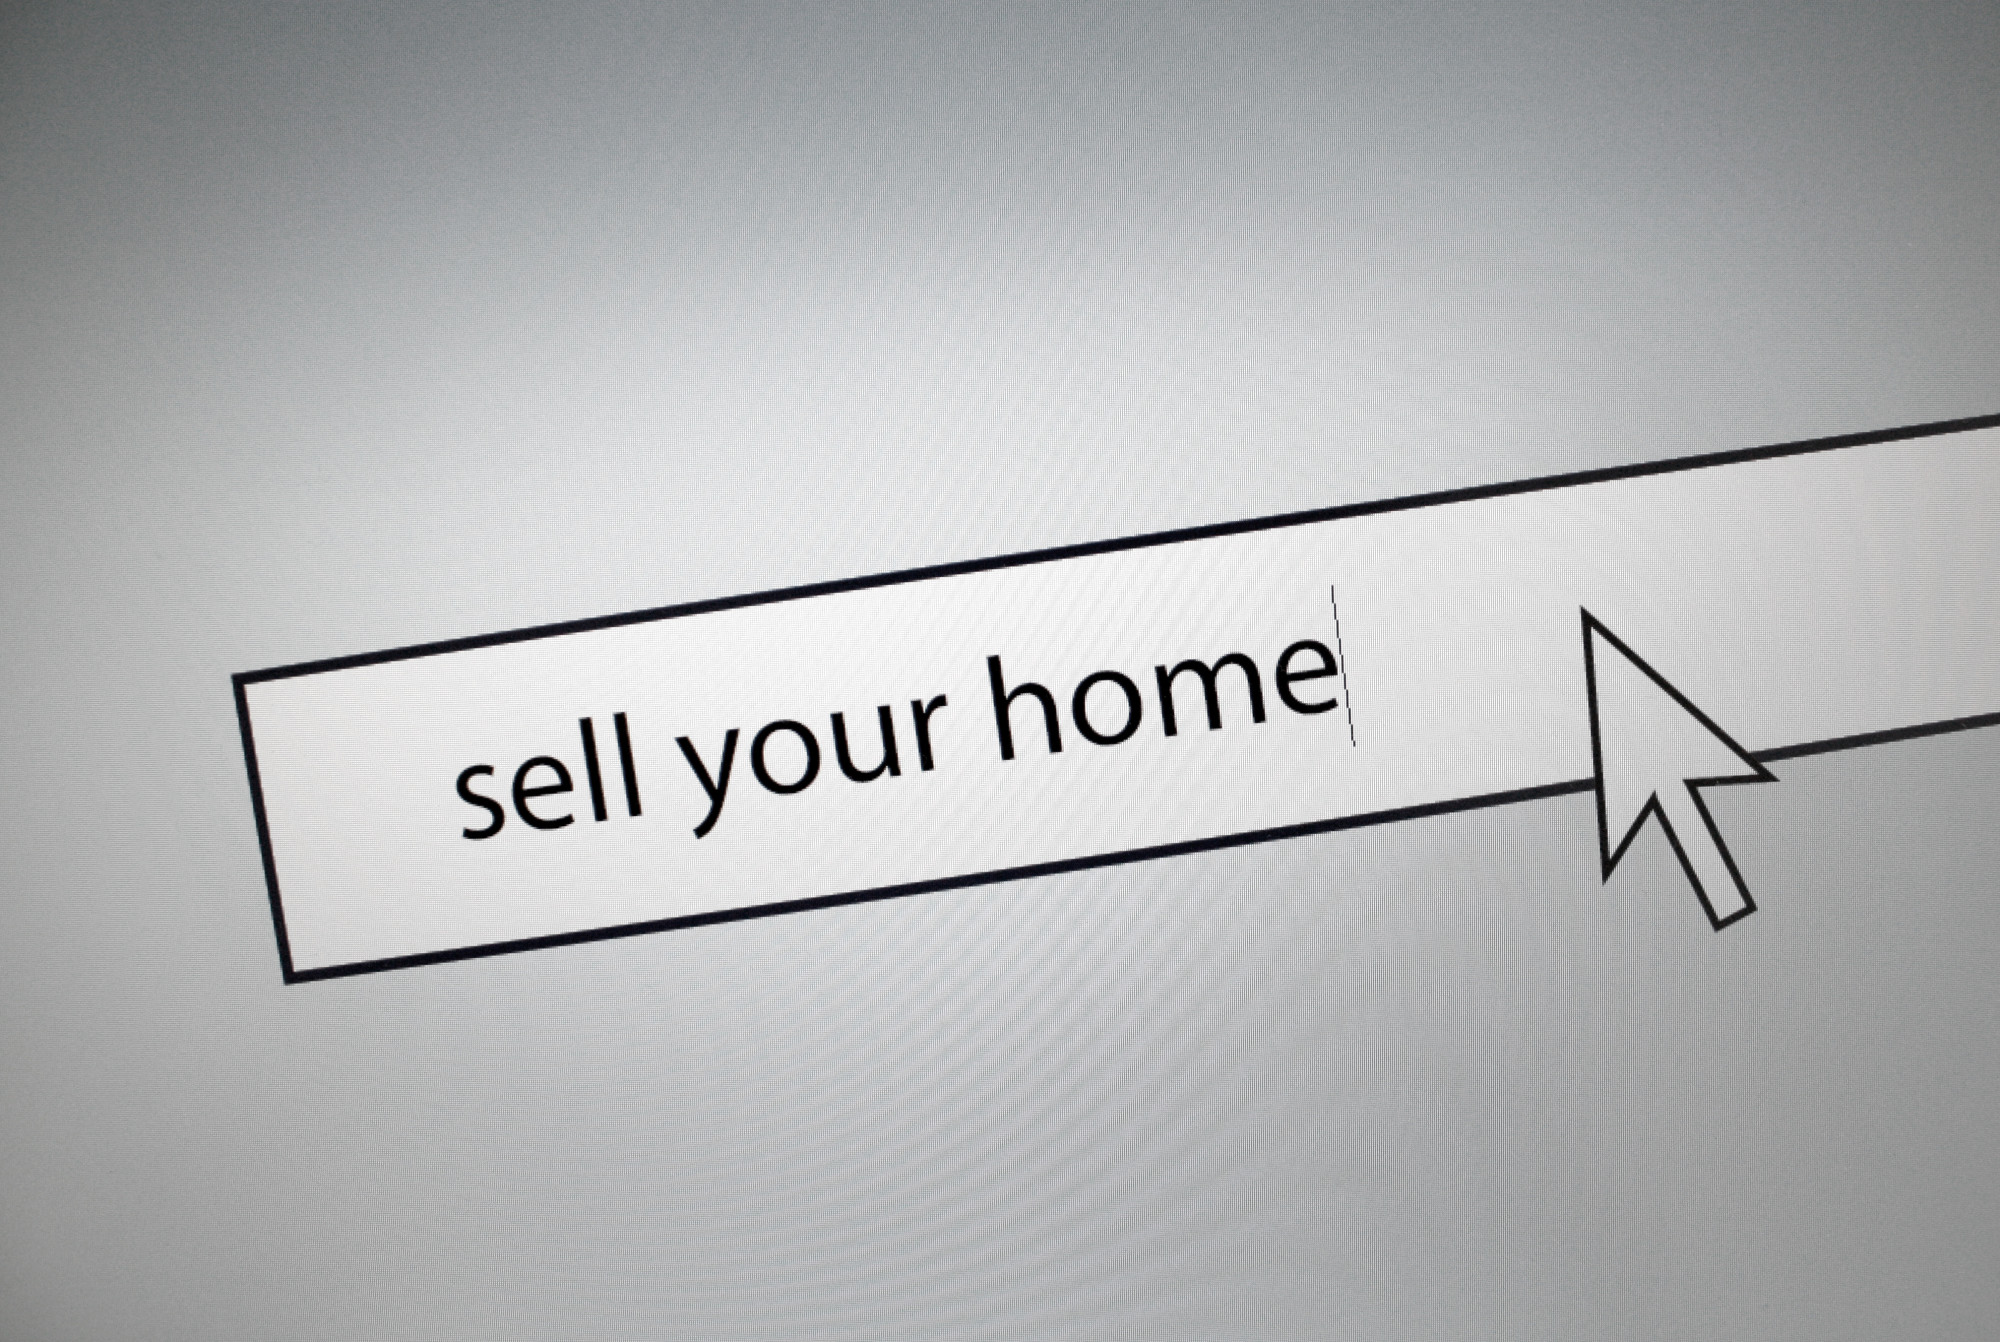 What Is the Best Way to Sell a Home Fast? 5 Tips